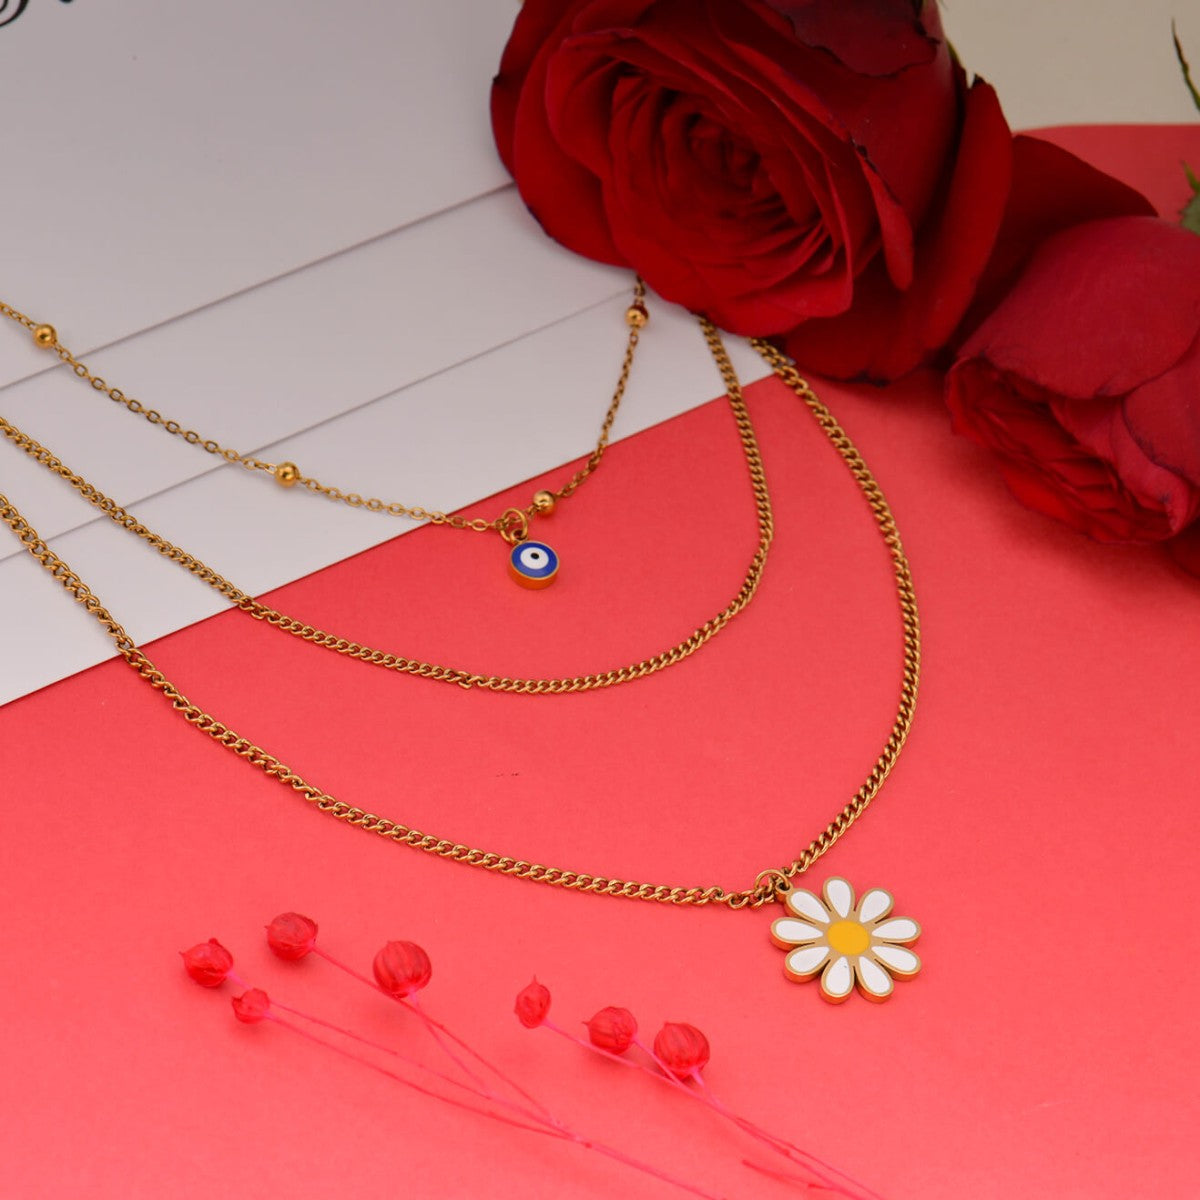 Buy Gold-Toned Necklaces & Pendants for Women by Fabula Online | Ajio.com